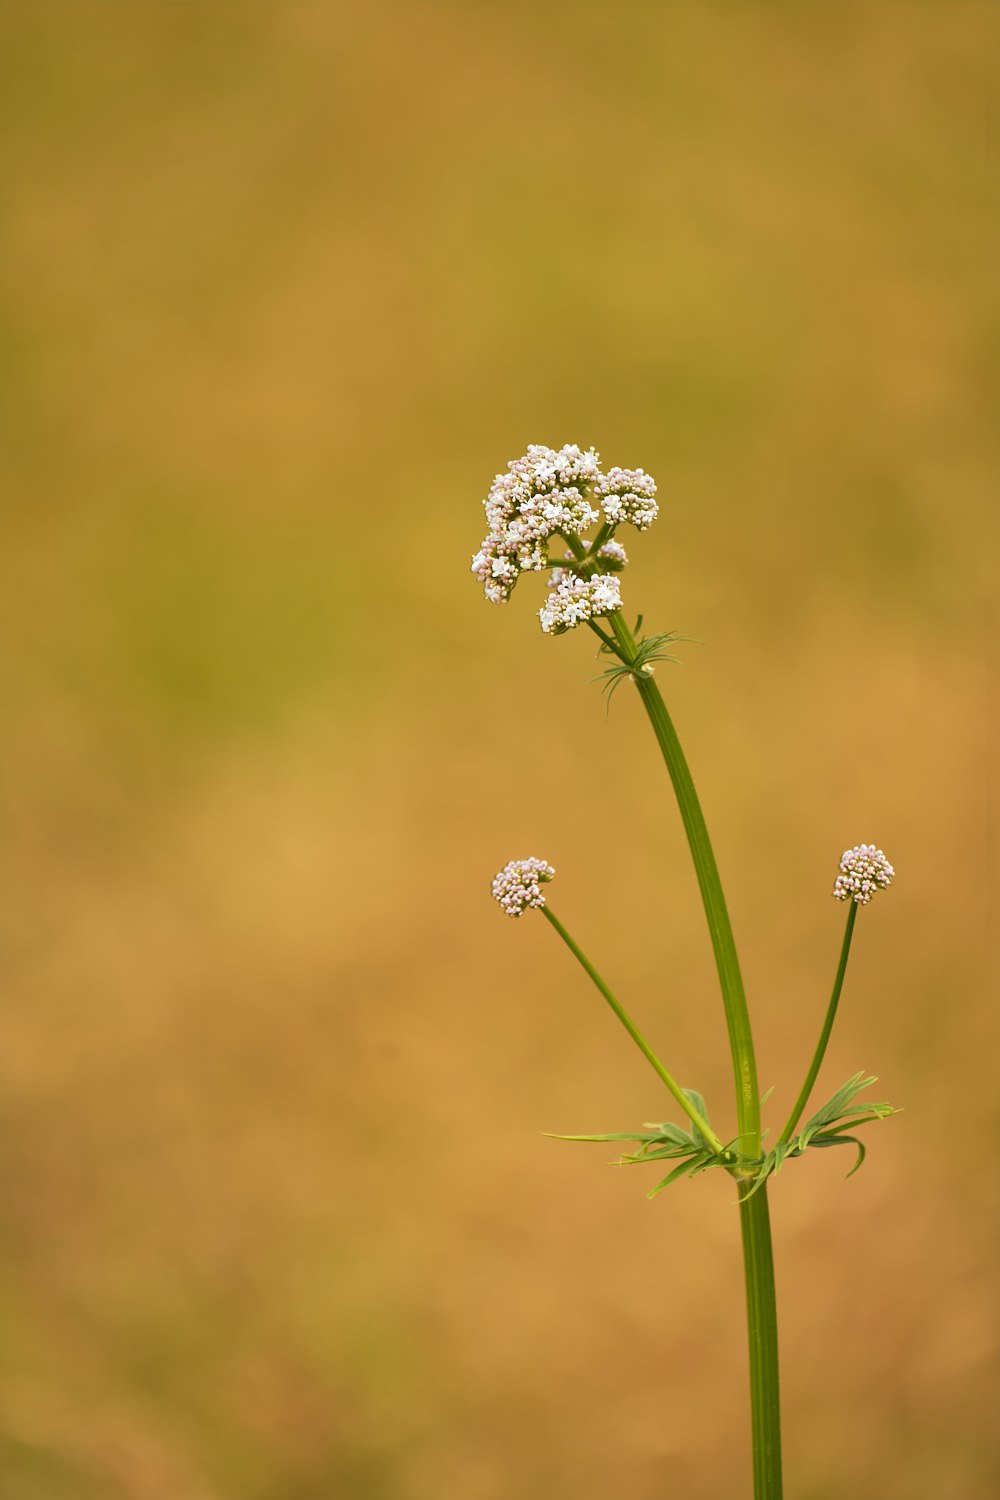 a small white flower sitting on top of a green stem